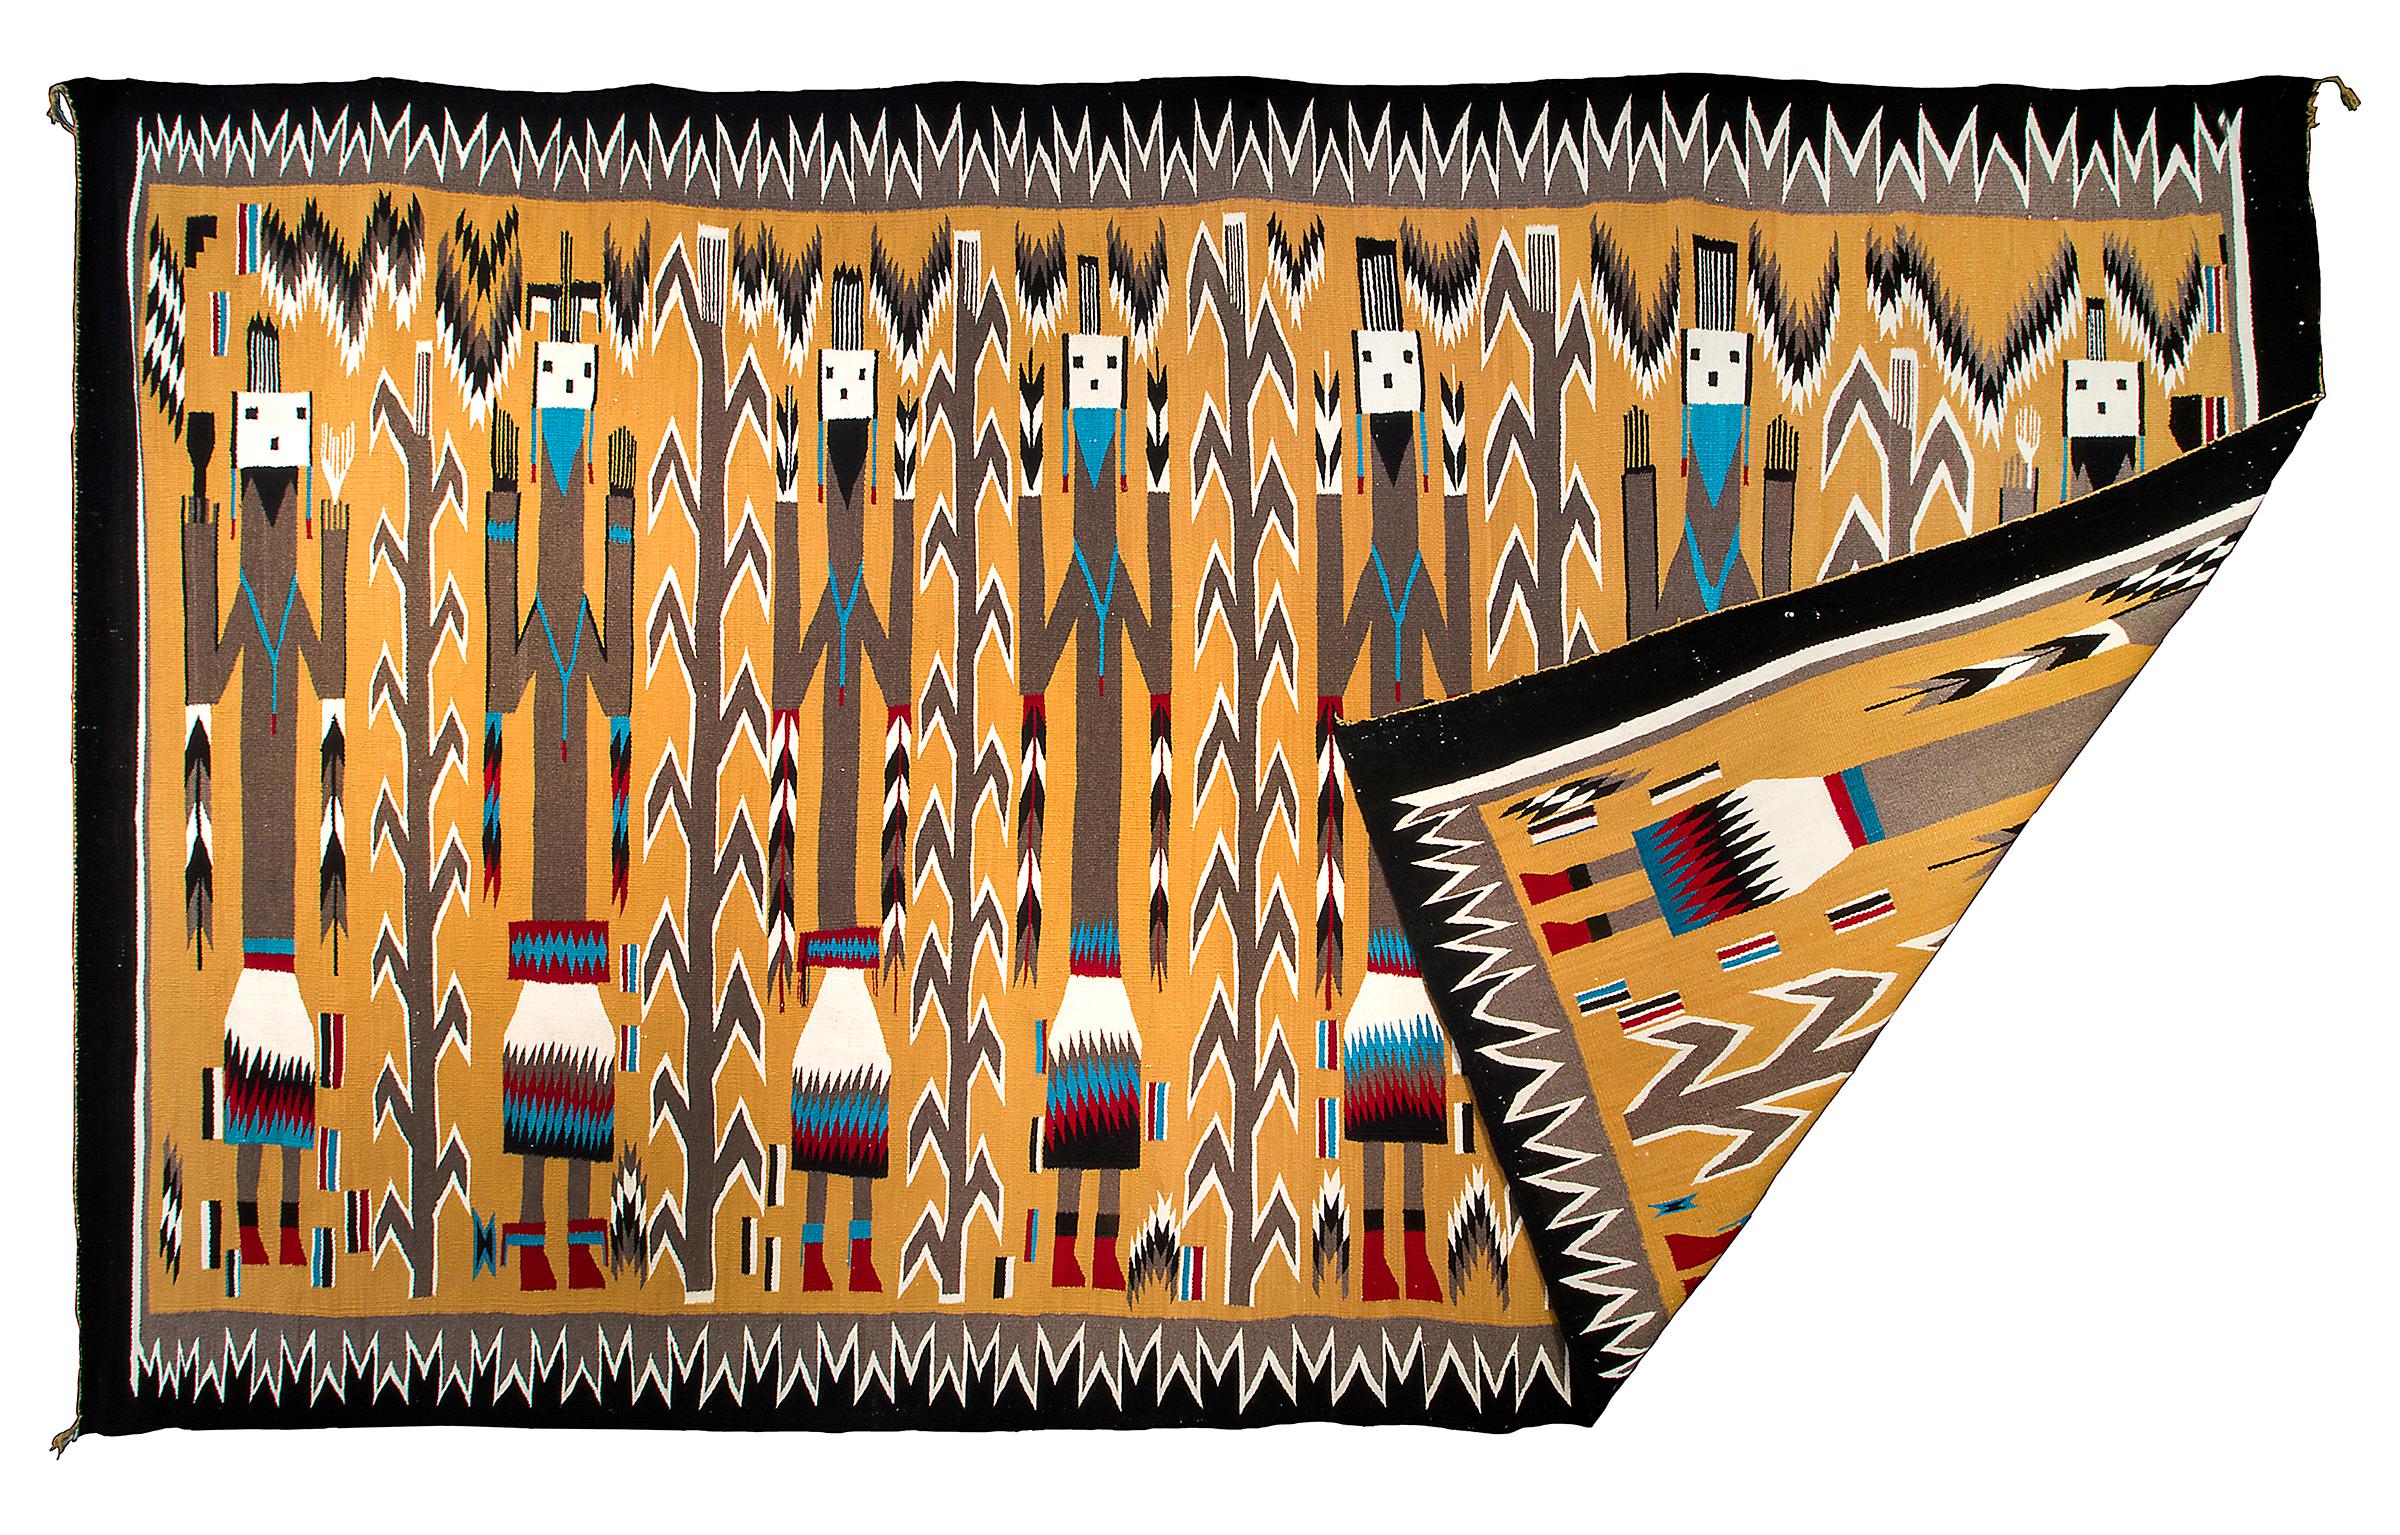 Vintage Navajo area rug, circa 1950s, Pictorial Weaving with seven Yei (Yeibichai) figures holding feathers. Hand-woven by a Navajo weaver in colors of yellow, black, white, blue and red. This southwestern rug is well suited for use on the floor as